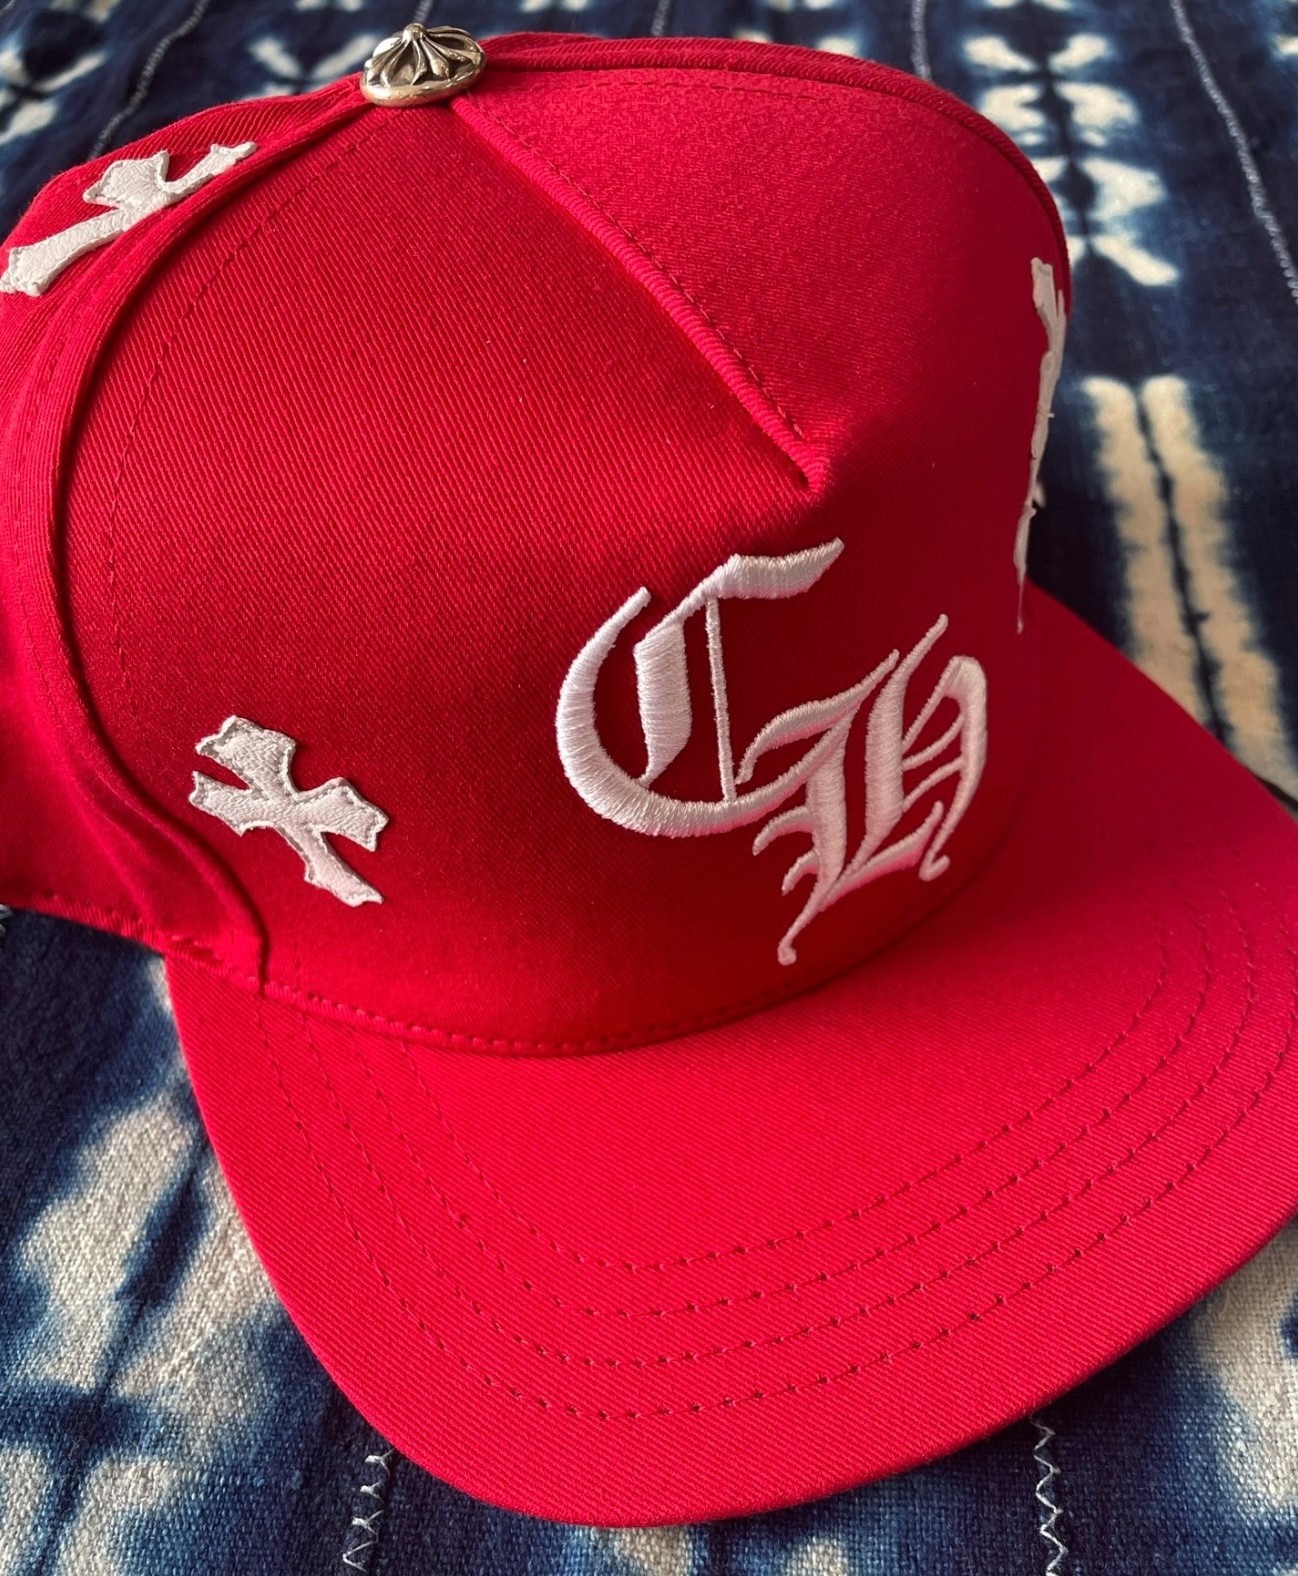 Chrome Hearts Red Cap with White Cross Patch - 2